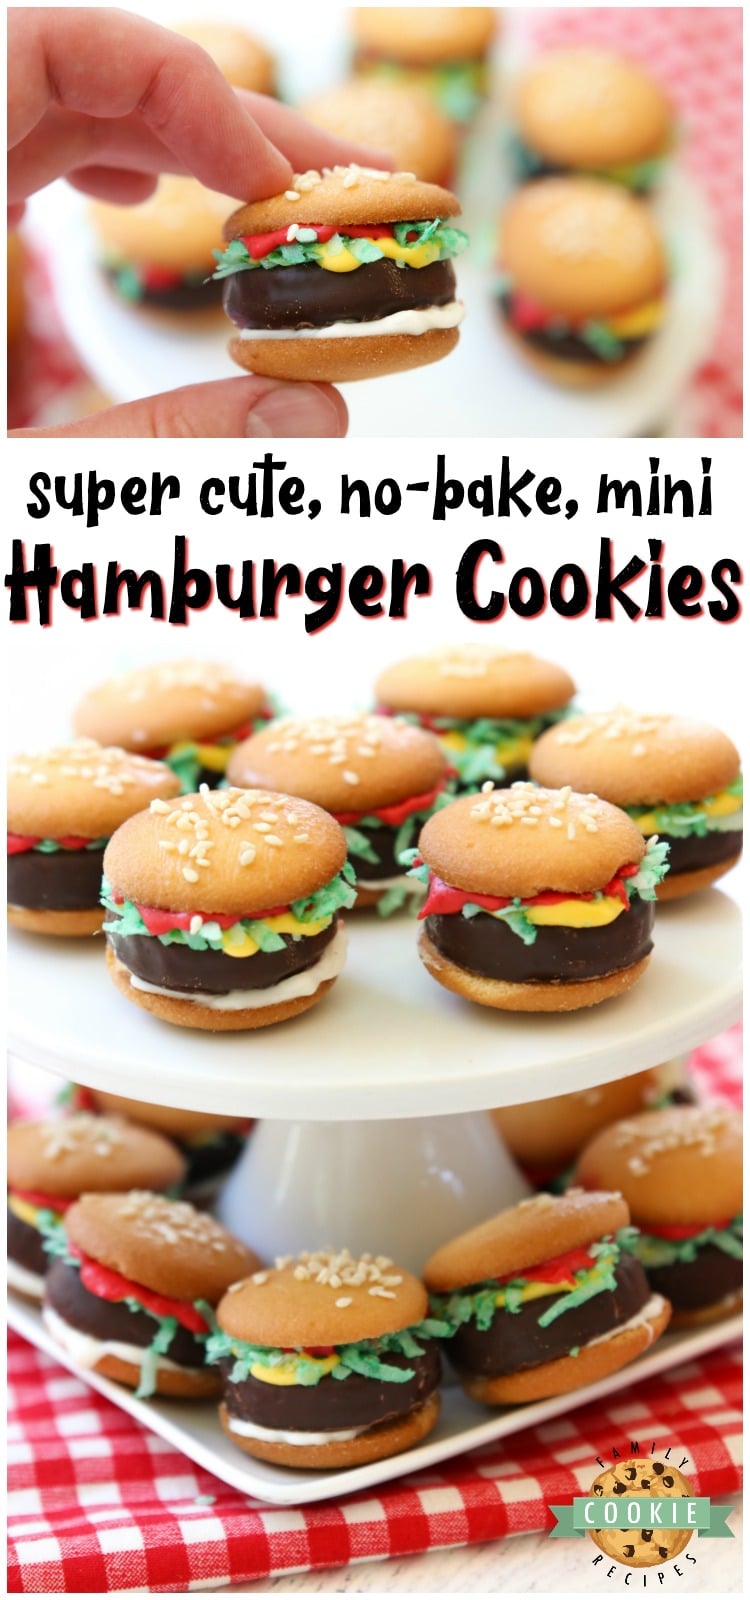 Mini Hamburger Cookies made from Nilla Wafers, York Peppermint Patties and melted candy! Super cute no-bake hamburger cookies that kids go crazy over! #cookies #nobake #hamburgers #burgers #miniburgers #candy #dessert #kidfood from FAMILY COOKIE RECIPES